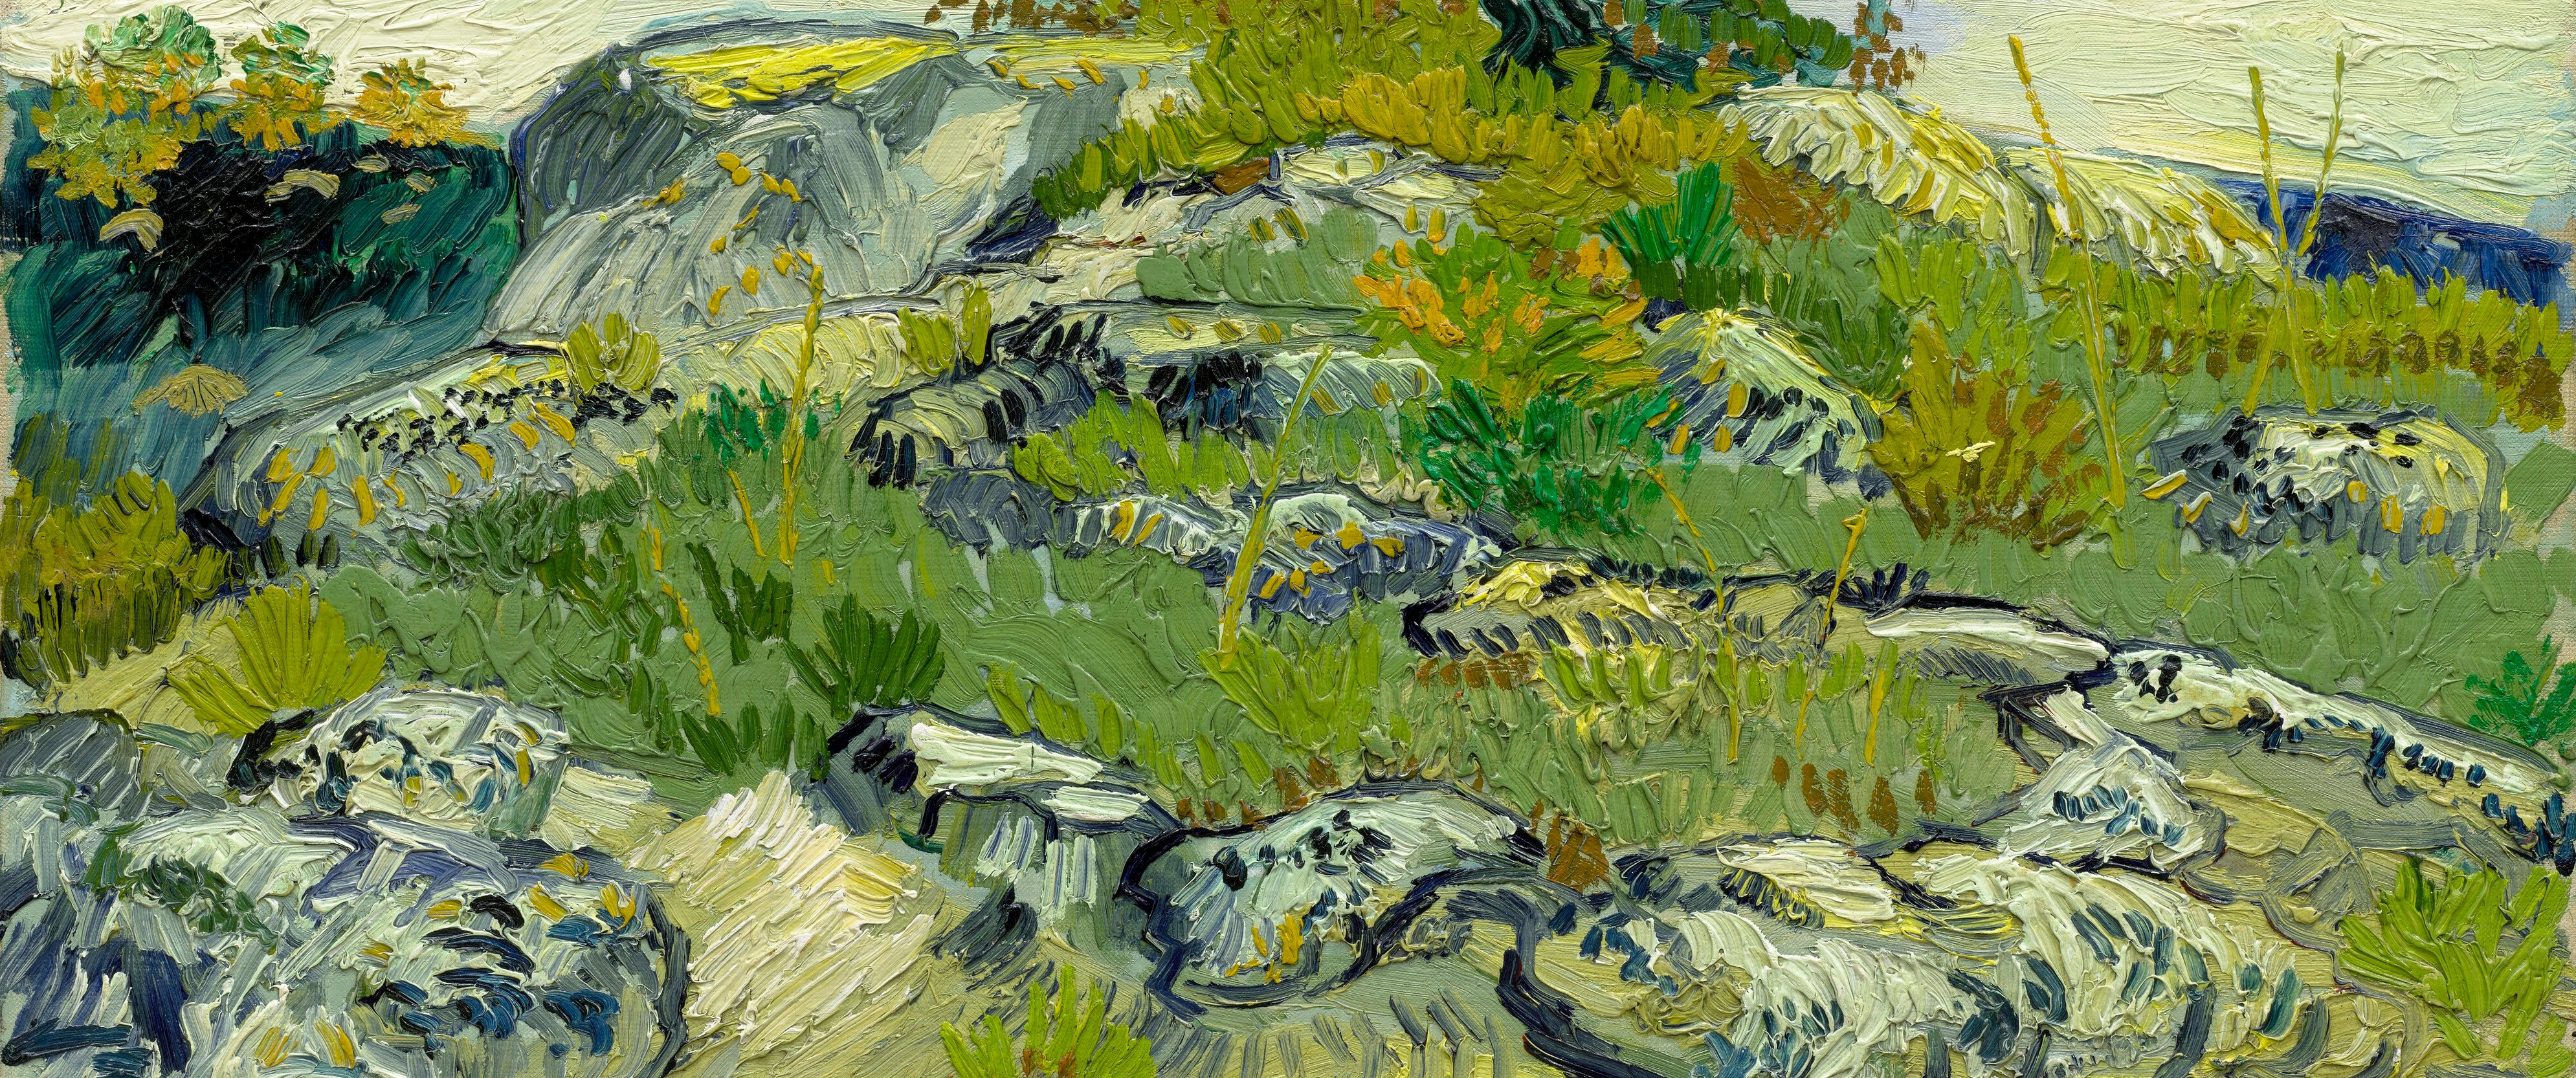 Vincent Van Gogh Painting Oil Painting Oil On Canvas Impressionism 3980x1666